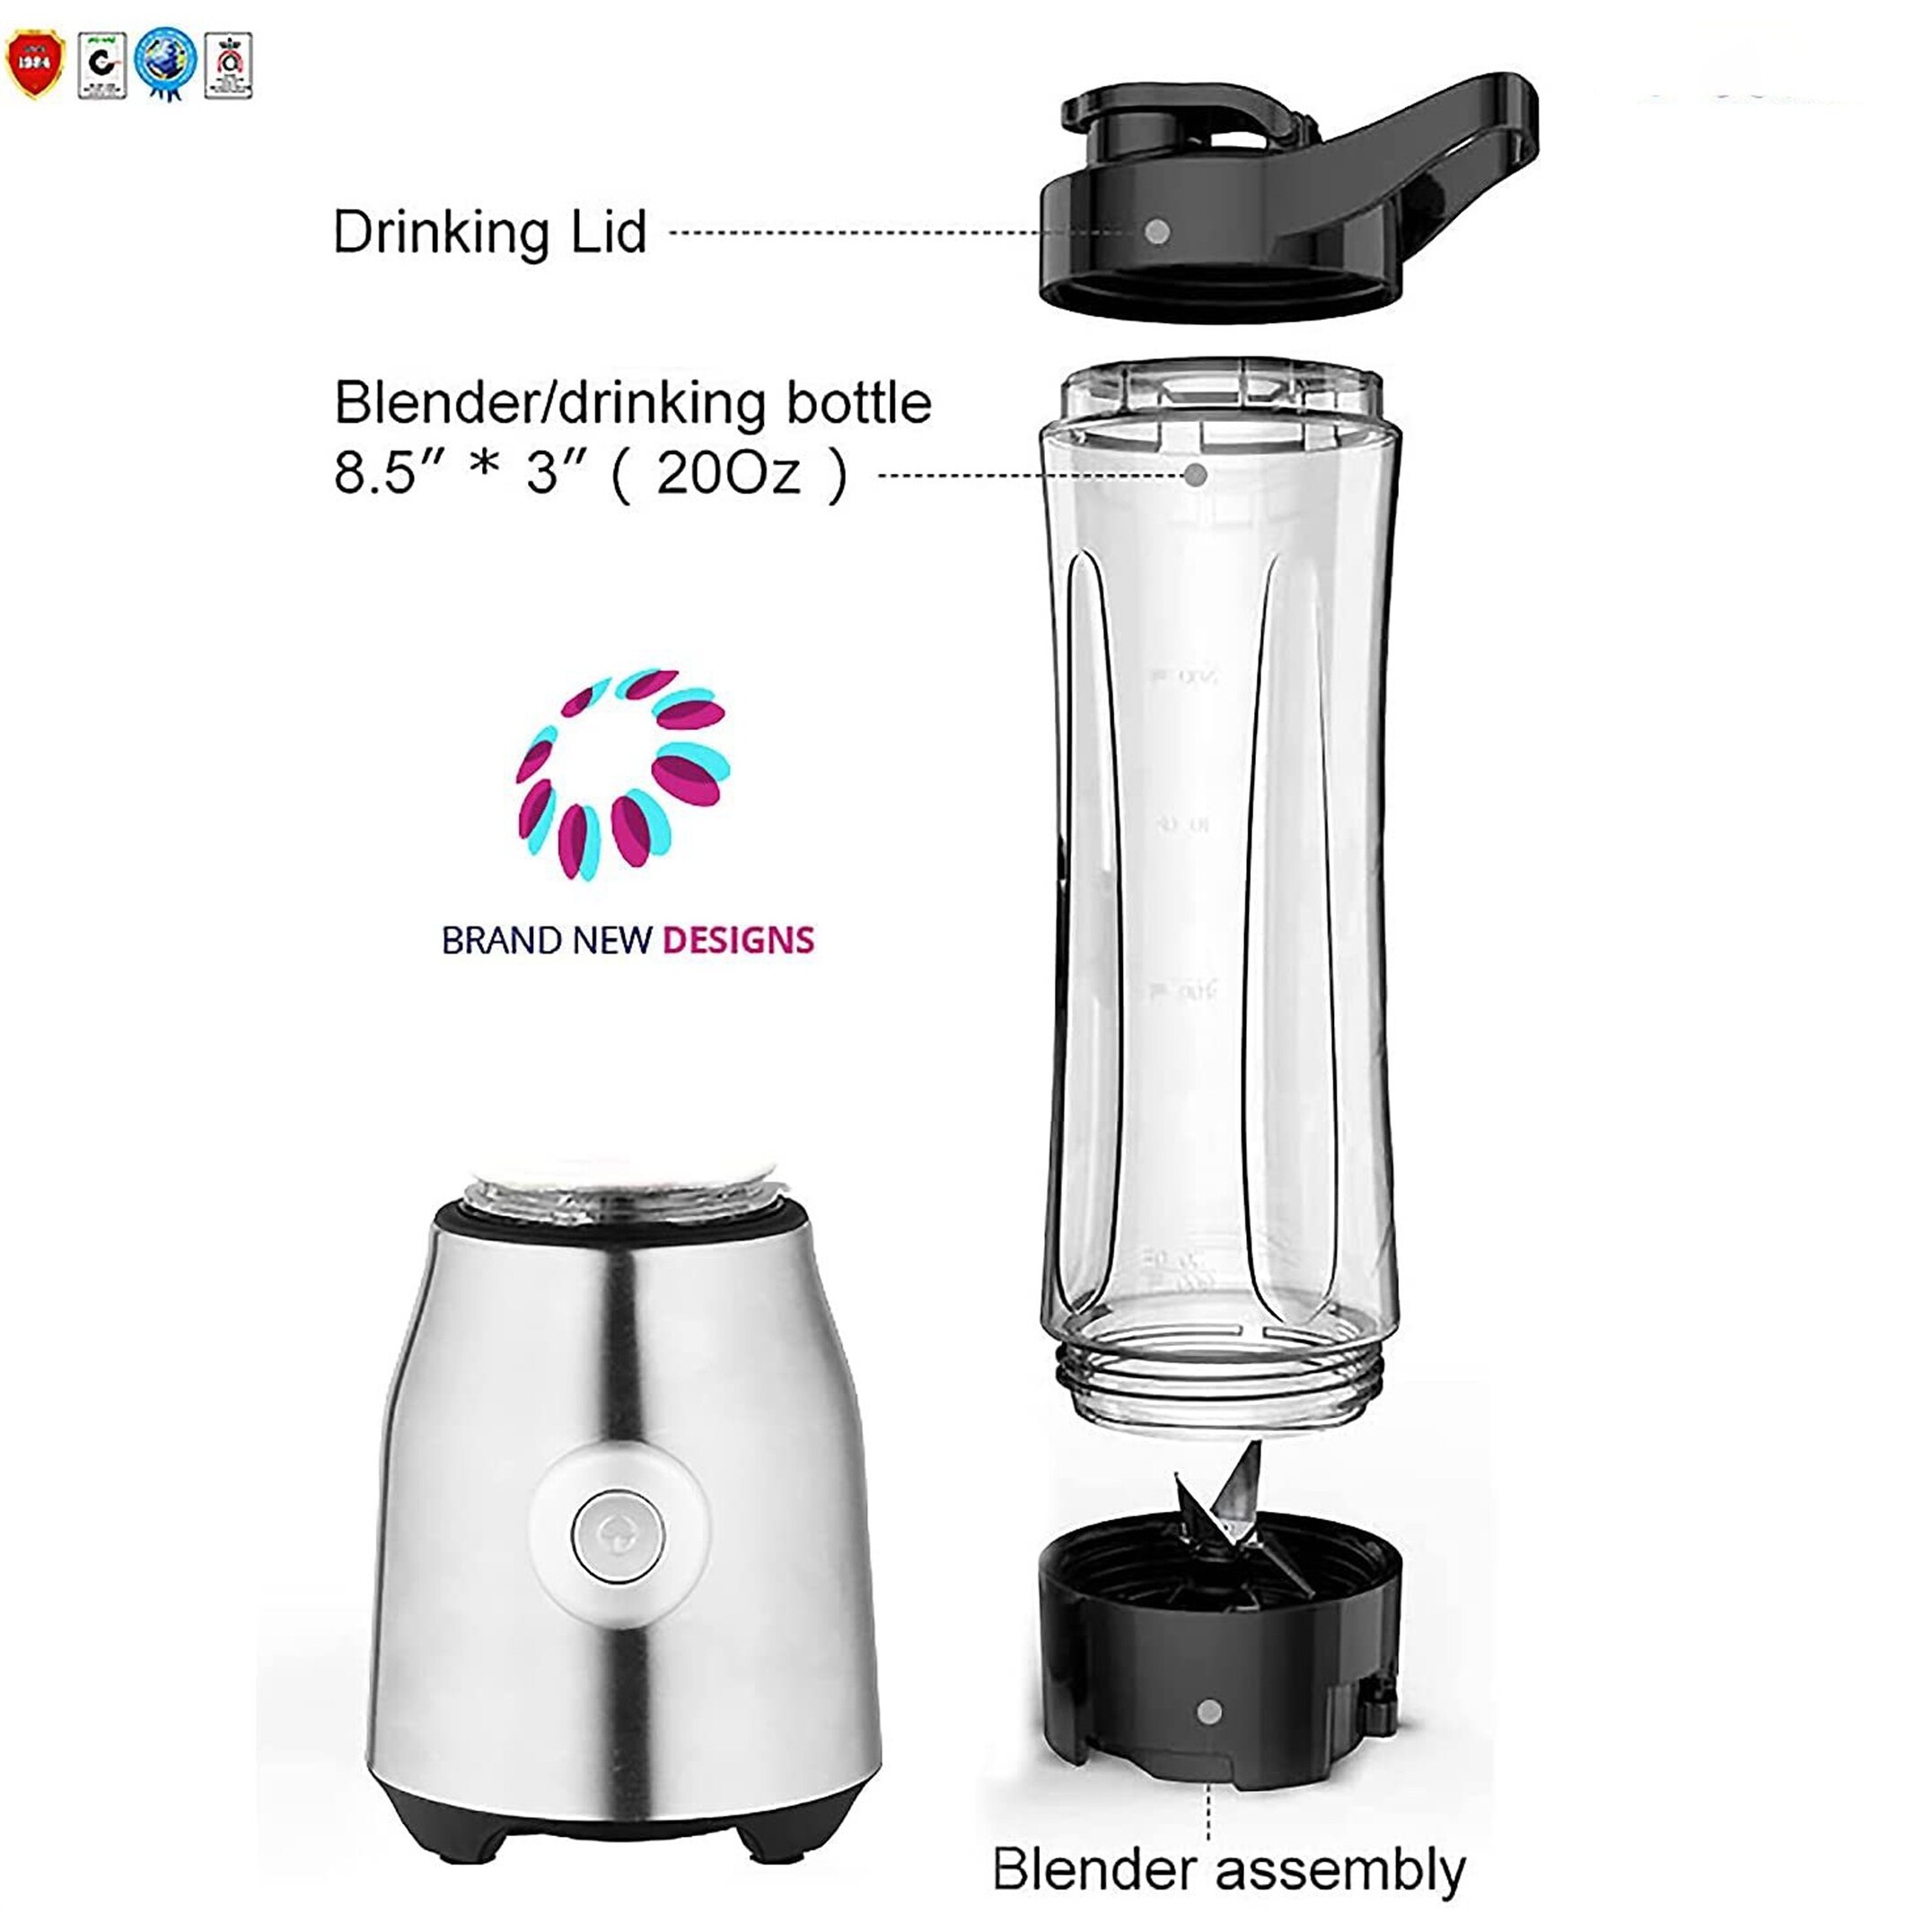 https://ak1.ostkcdn.com/images/products/is/images/direct/12c31c93666d4696d21e51322c2f1496fbd83a74/Blender-Electric-Blenders-Smoothie-Shake-Mixer-Food-Blend-Grind-%281Cup%29.jpg